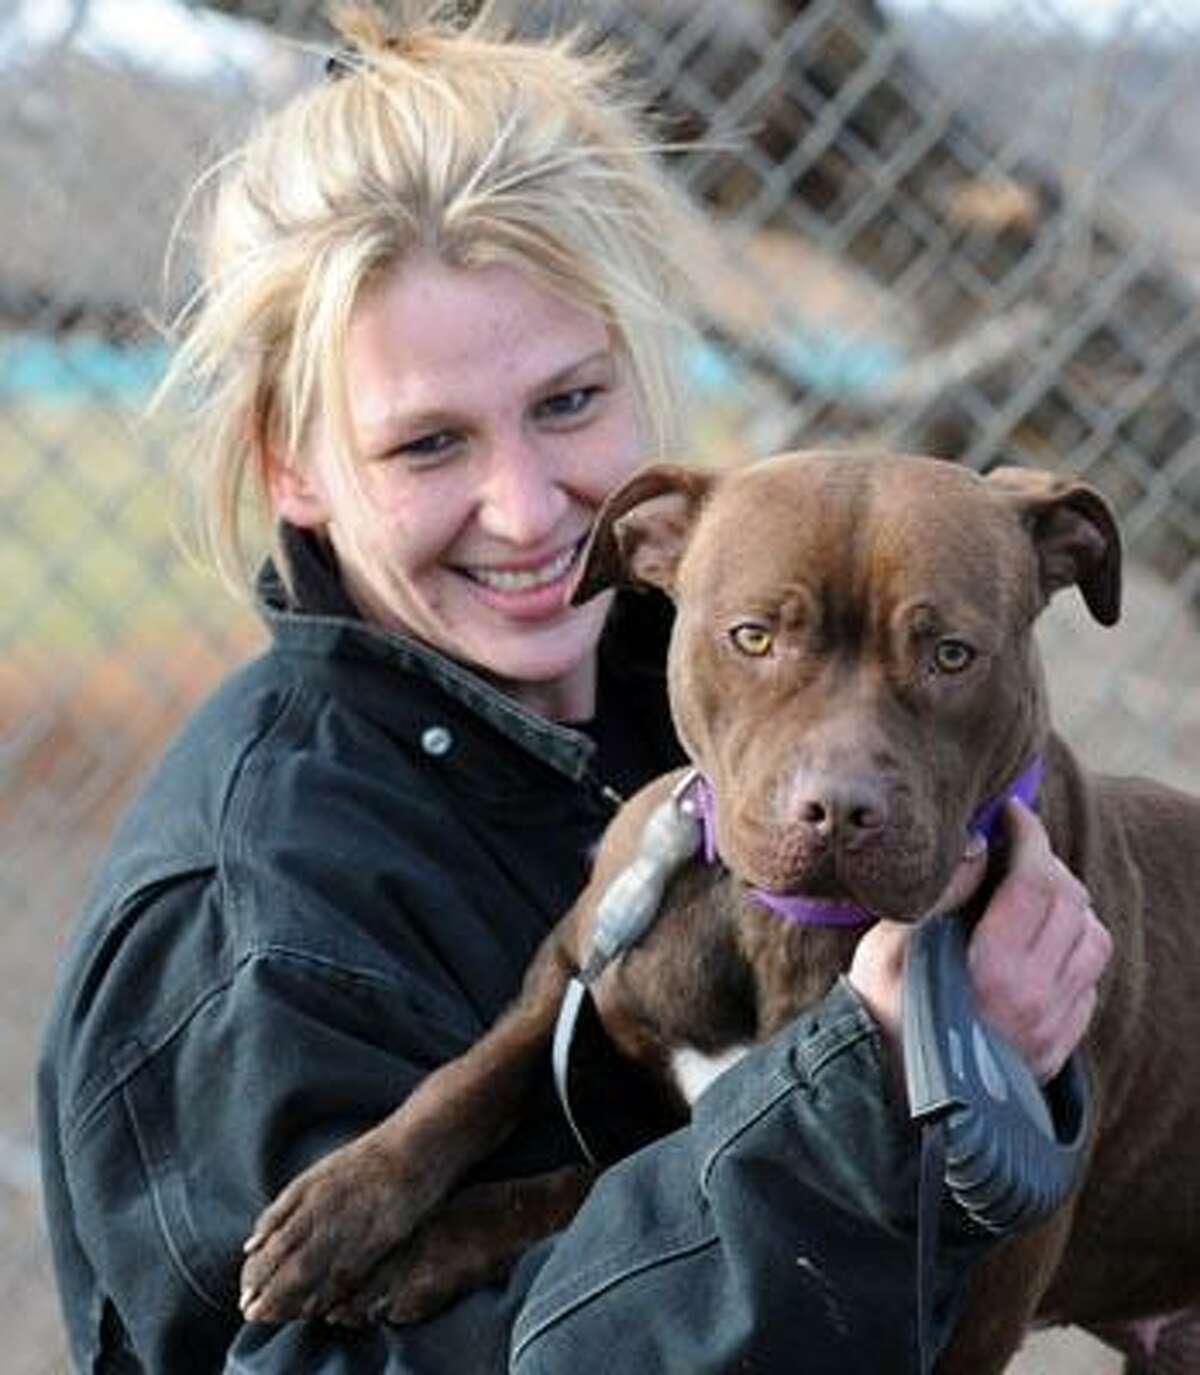 Milford Animal Control animal caregiver Cindy Schultz with Ginger, a pit bull the Shelter is trying to place. (Mara Lavitt/Register)